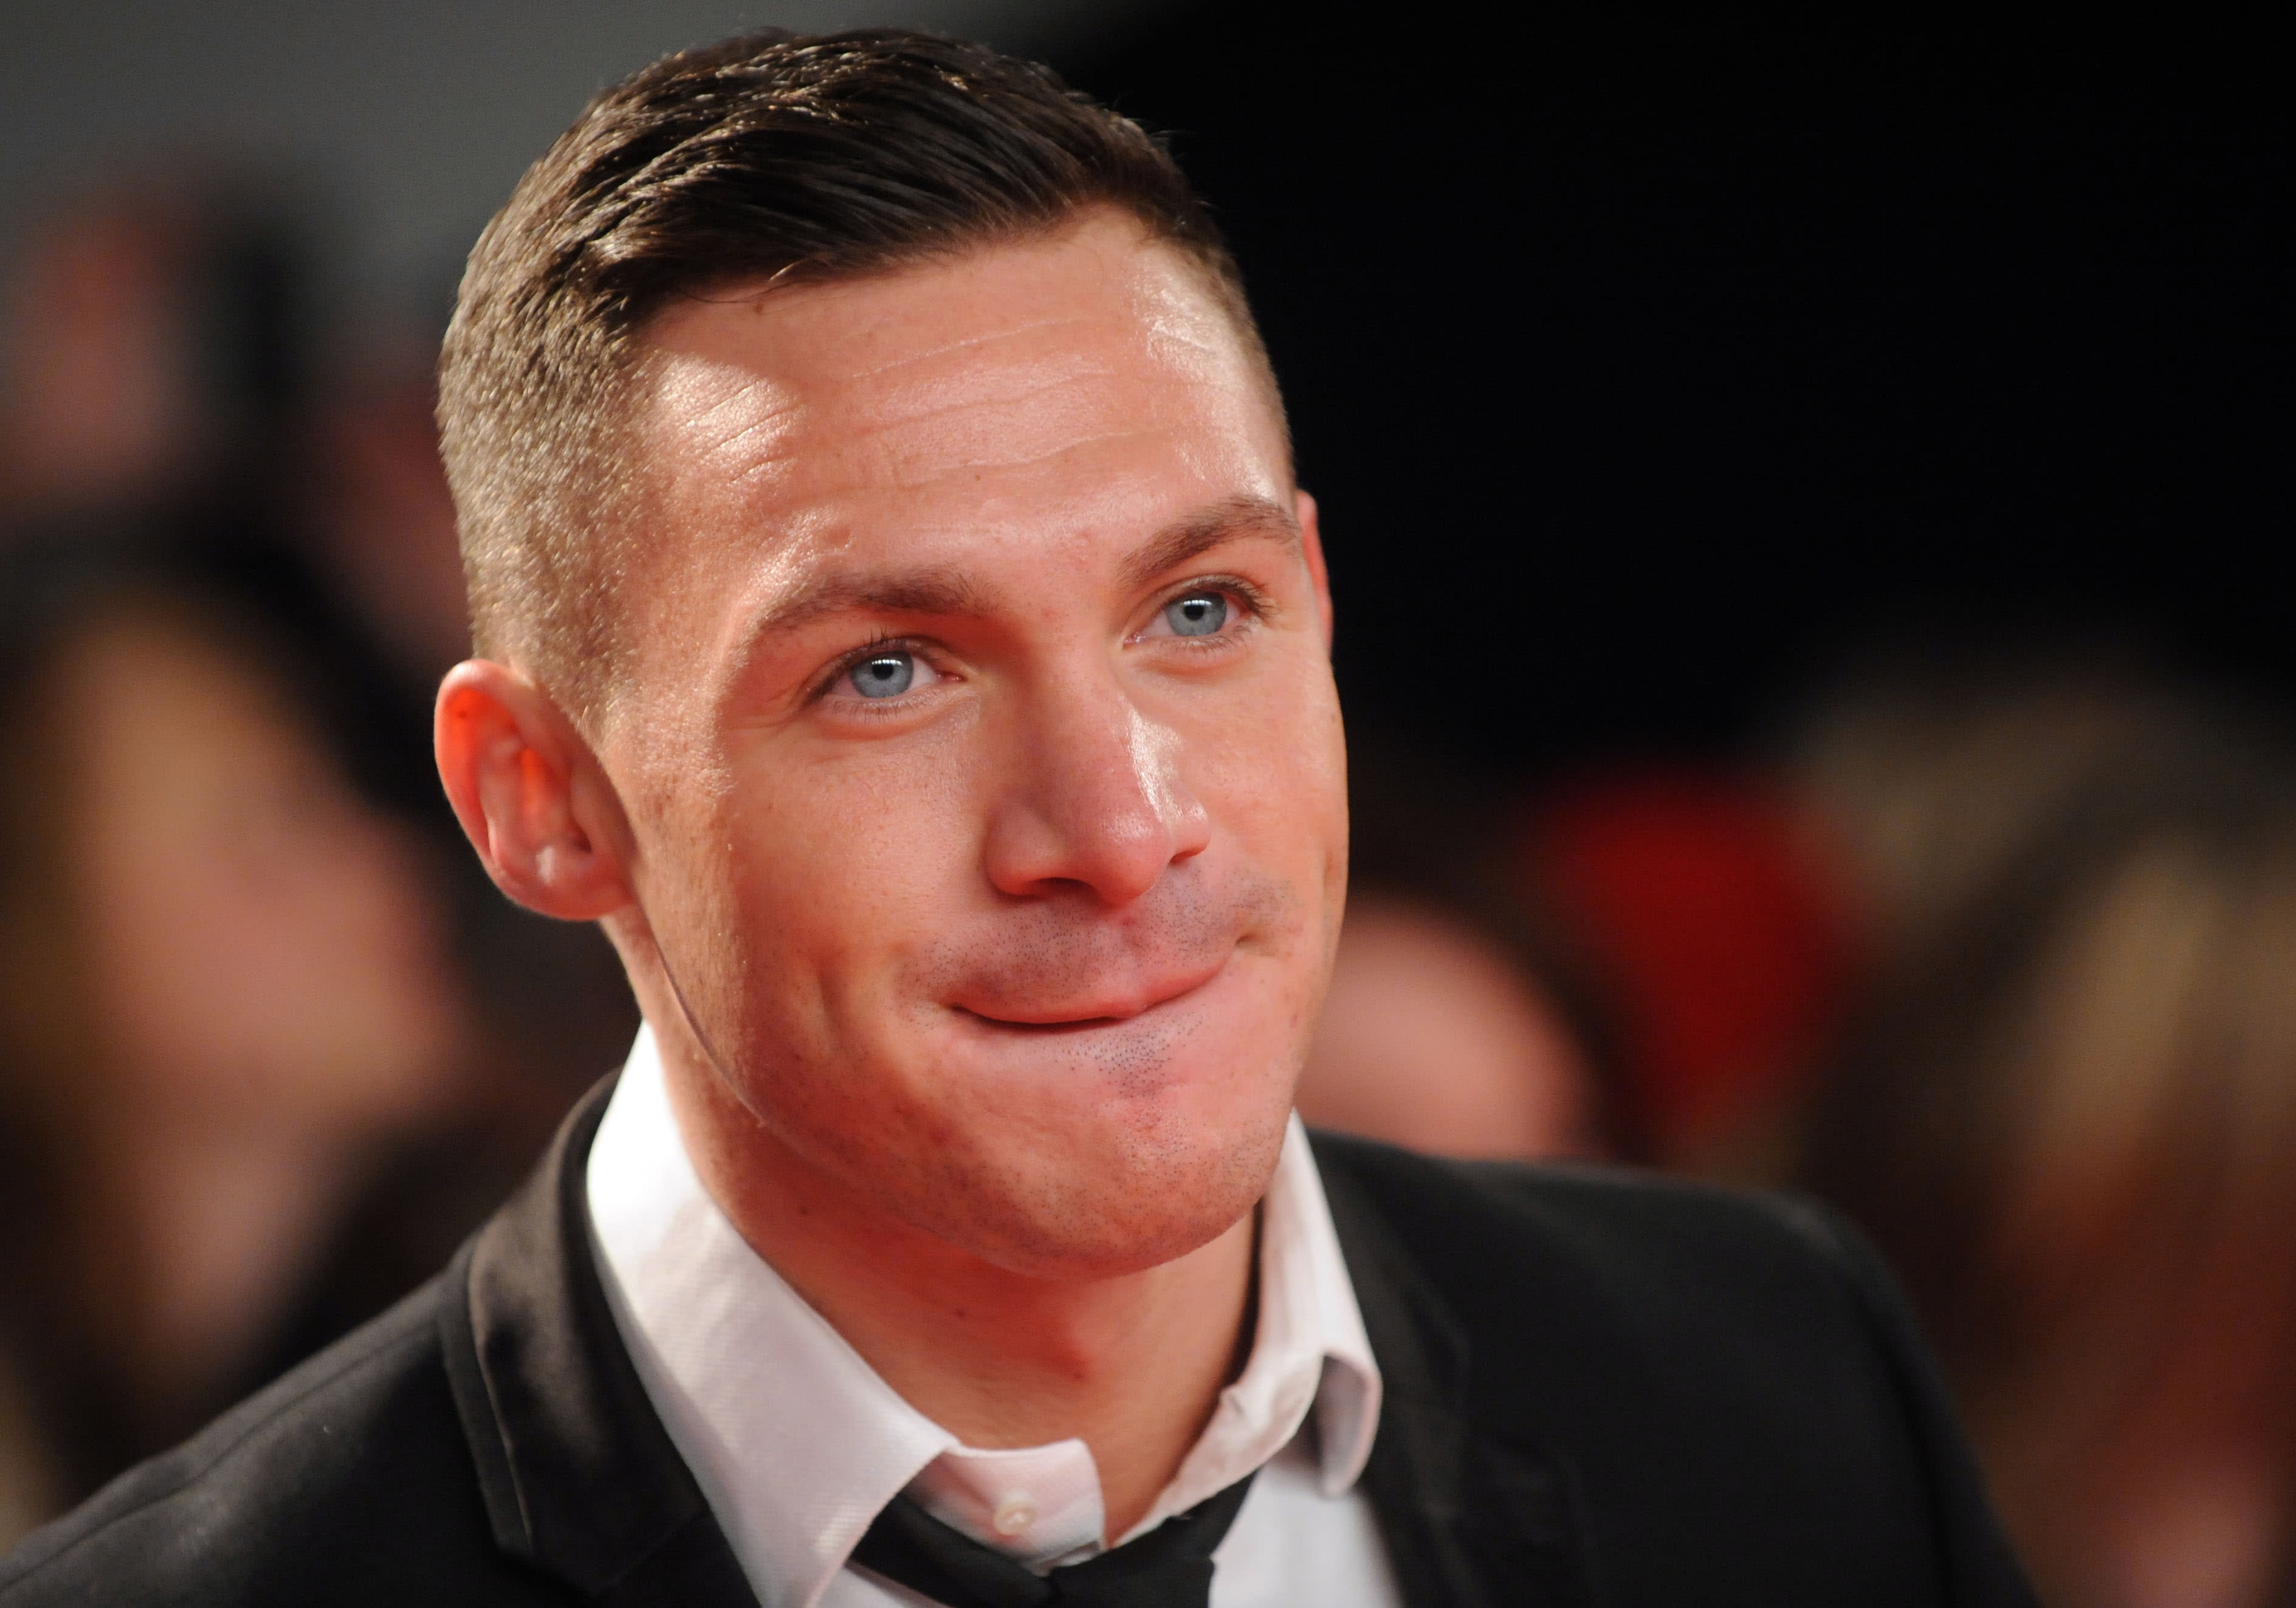 Kirk Norcross: Reality TV turned me into a suicidal monster